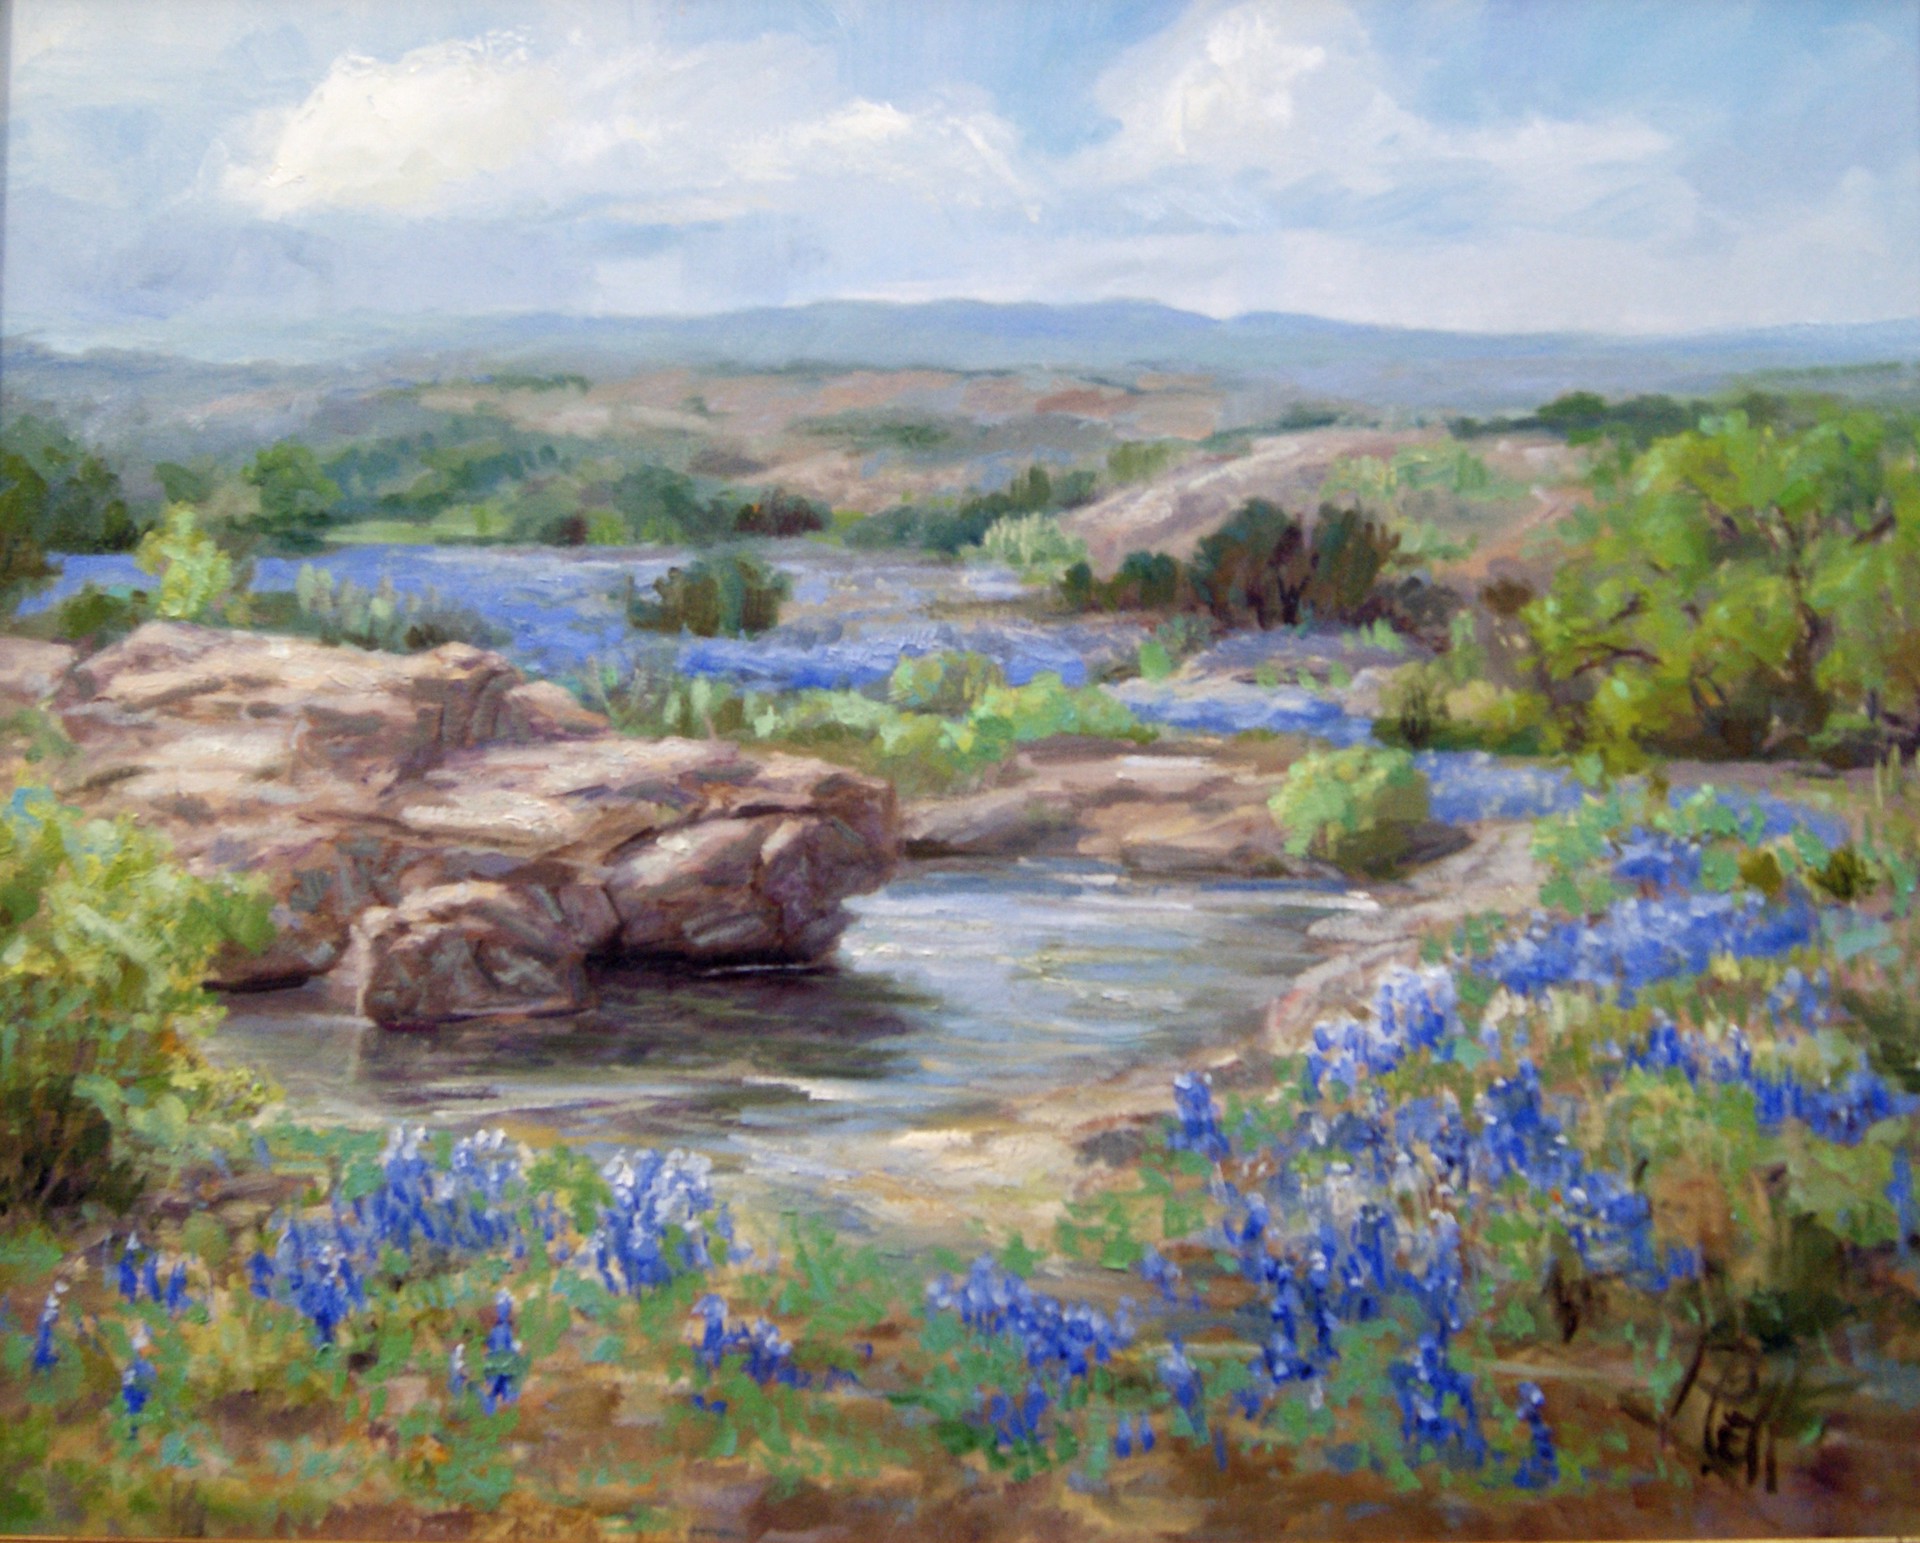 Bluebonnets at Turtle Rock by Lilli Pell